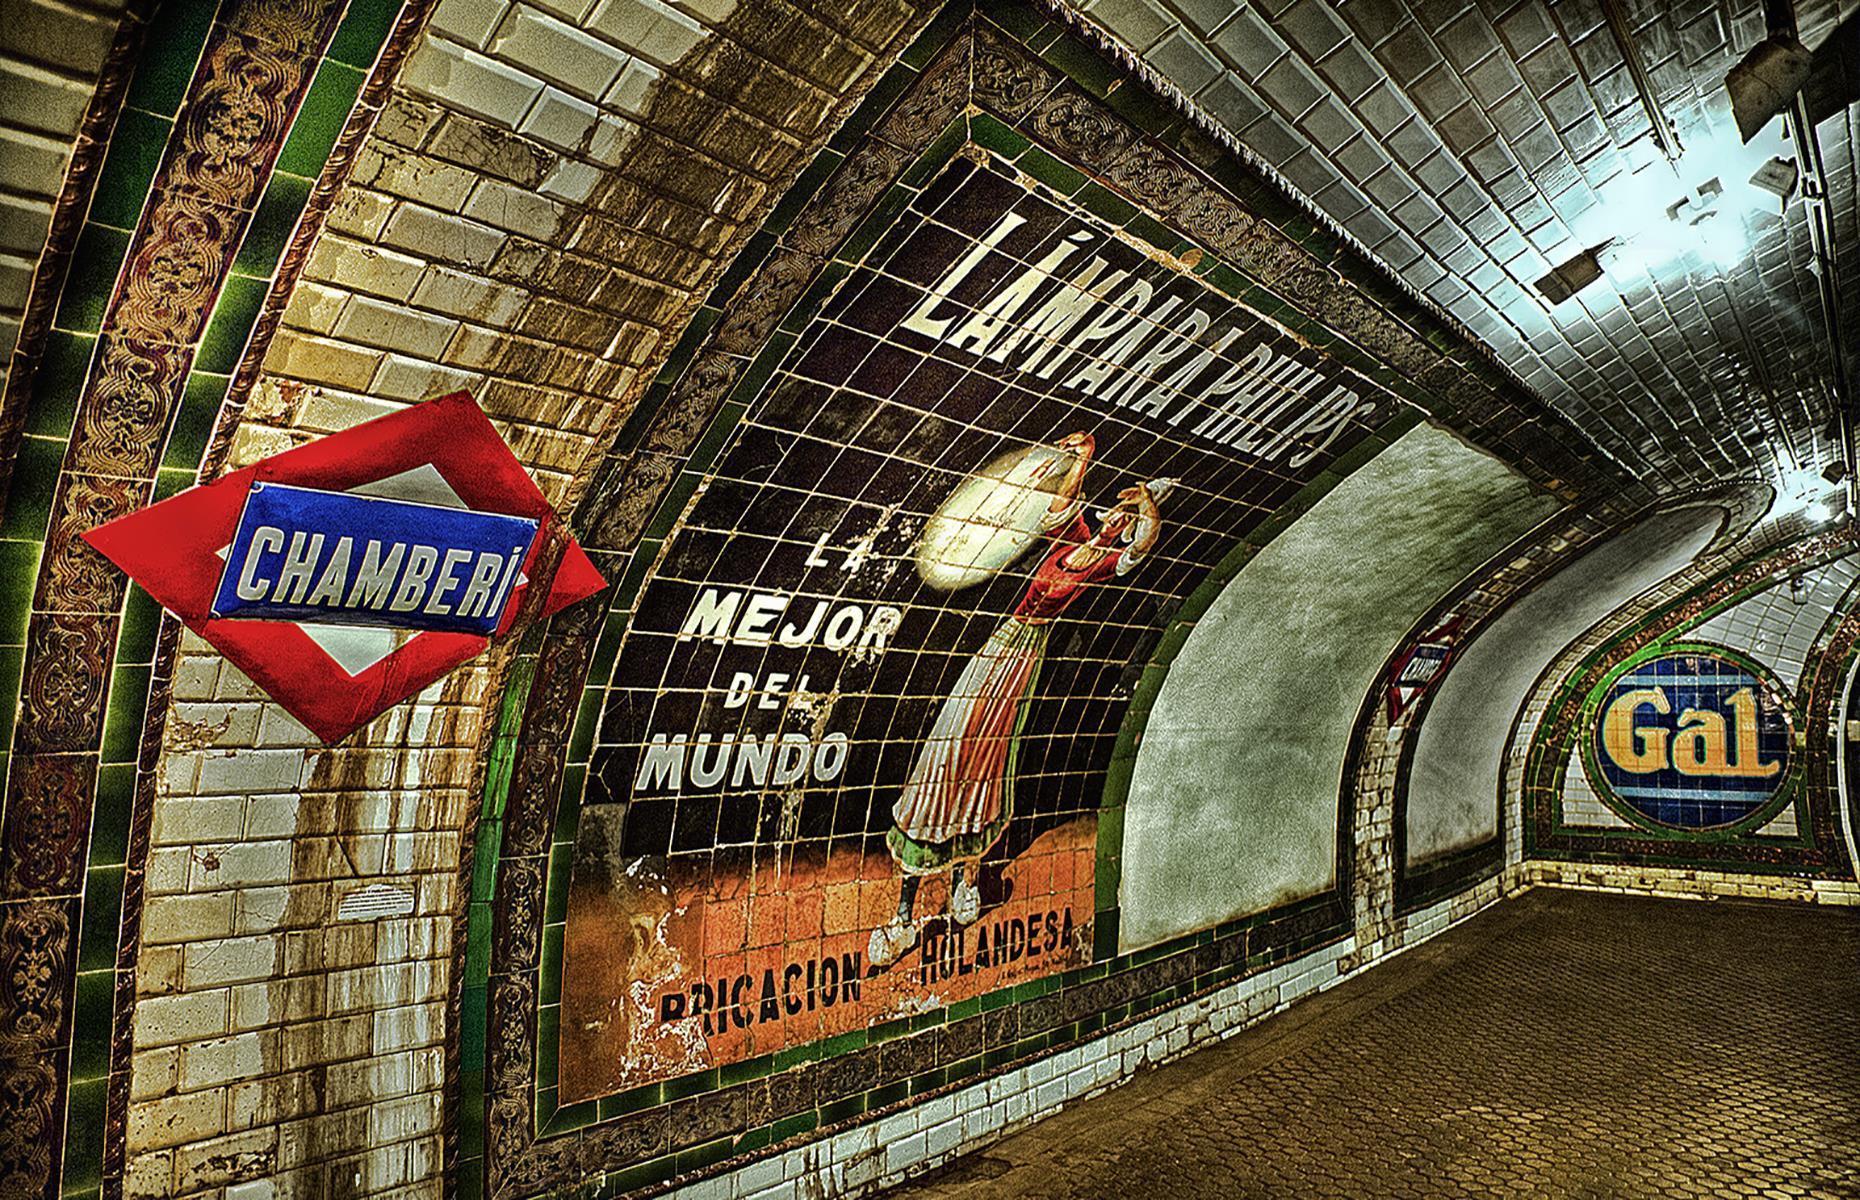 <p>The history of Madrid's metro is captured in this abandoned station dating from 1919. It was in operation up until the 1960s, when it could no longer accommodate the city's more modern, longer trains. The historic station remained deserted for decades, until the 2000s, when it was reopened to visitors – they come today to spot adverts, turnstiles and benches from a time gone by. There are currently limits on group numbers due to COVID-19: <a href="https://www.metromadrid.es/en/who-we-are/anden-cero">see here for details</a>.</p>